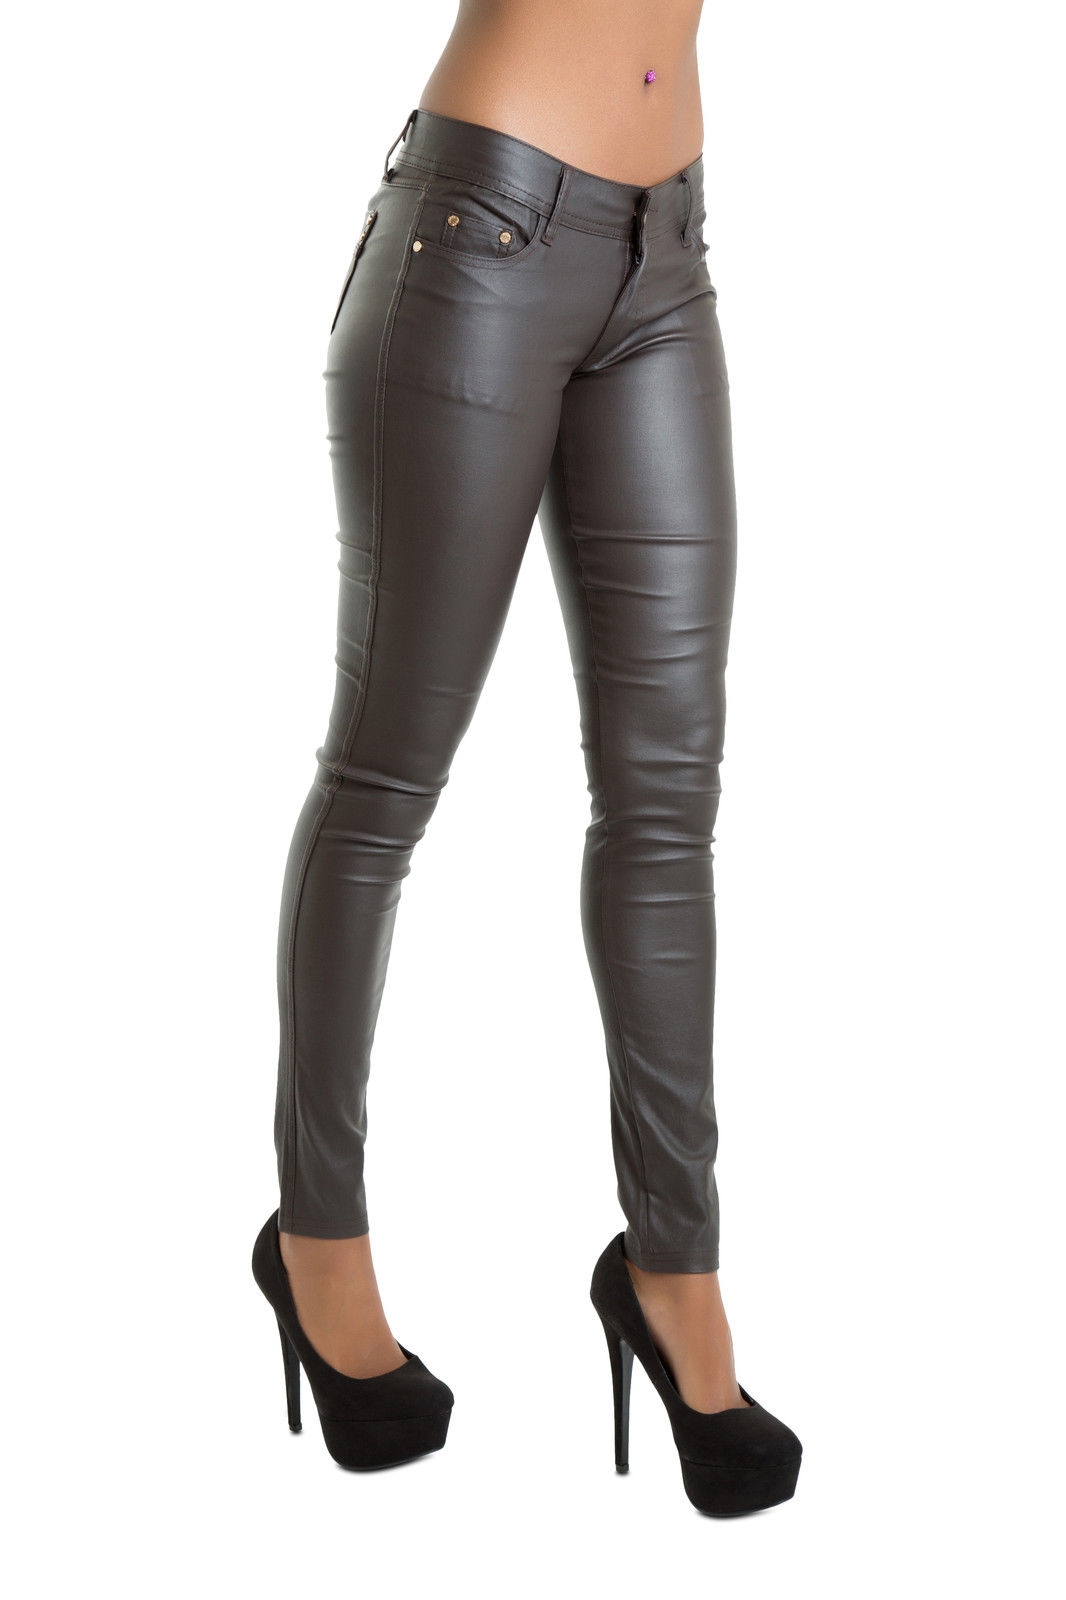 Women's Faux Leather Leggings Stretch High Waisted Shiny Leggings